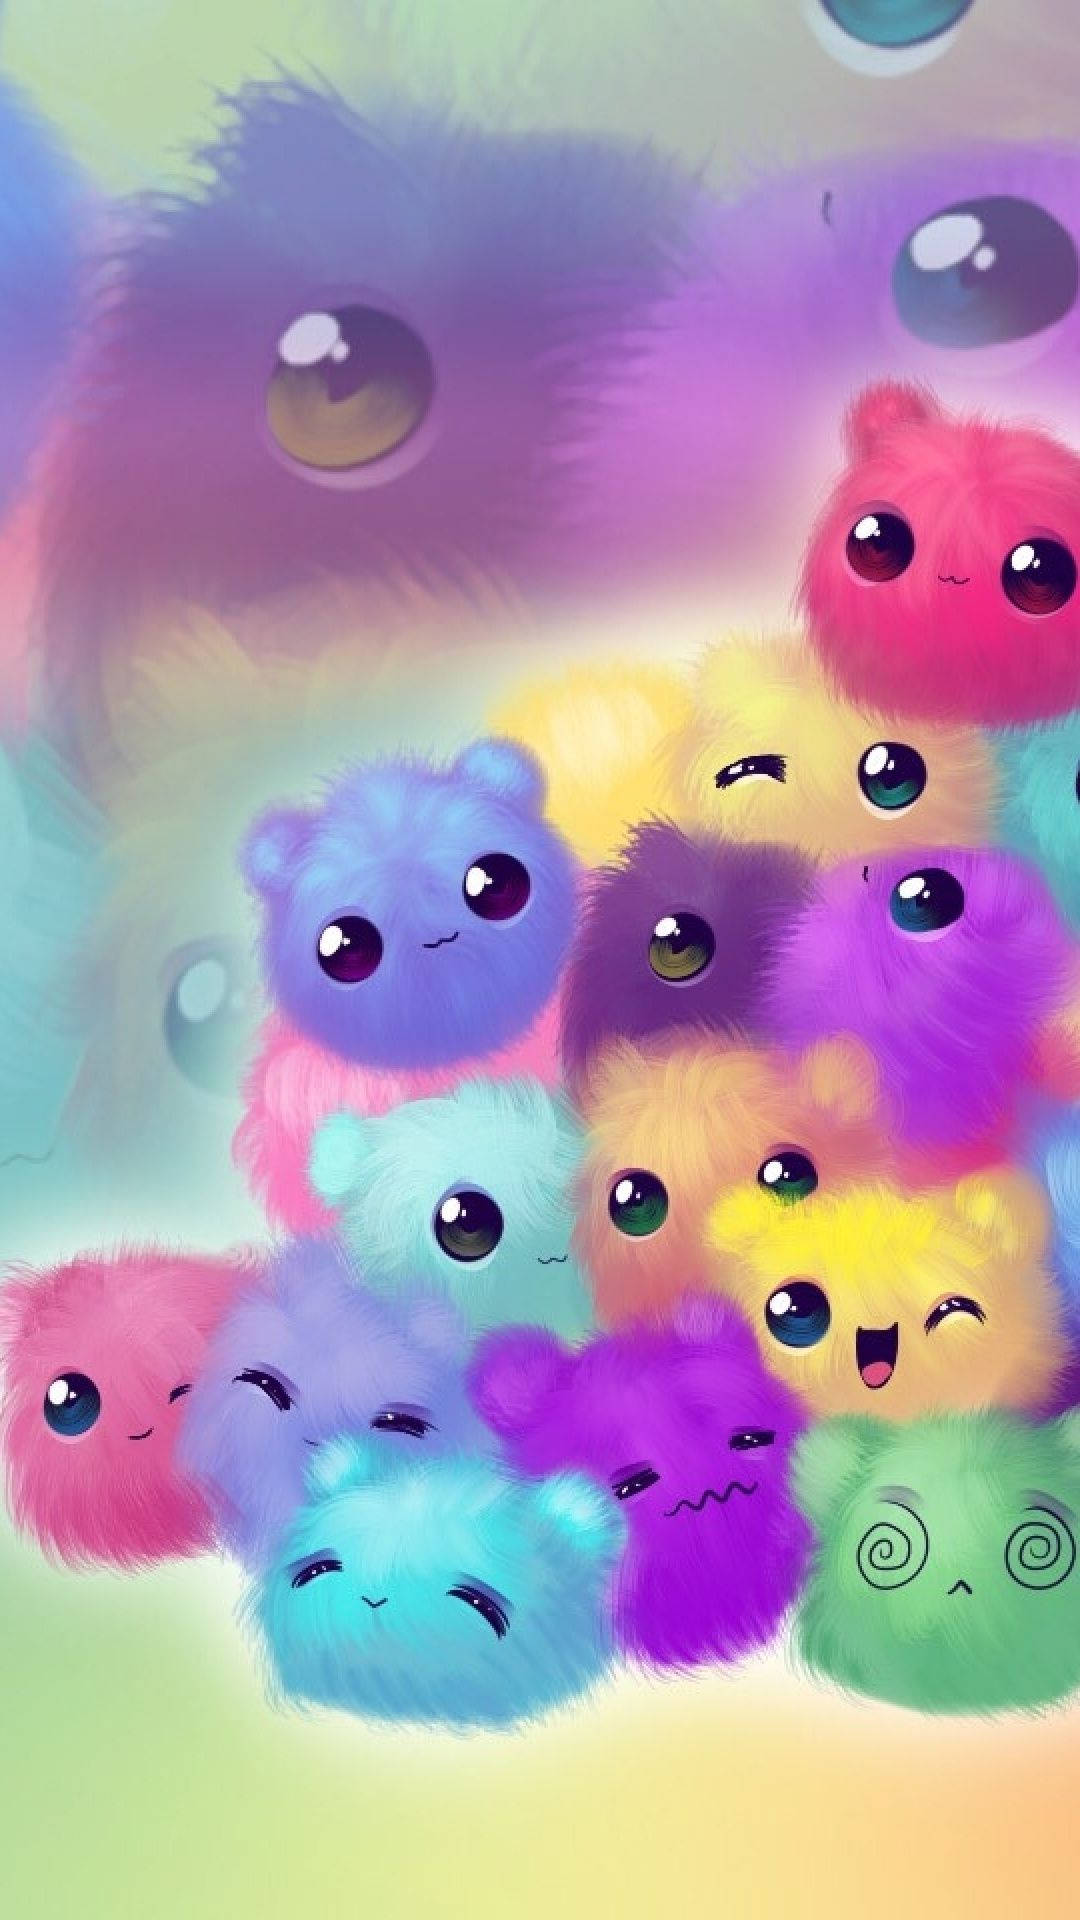 Cute Colorful Fuzzy Creatures Wallpaper